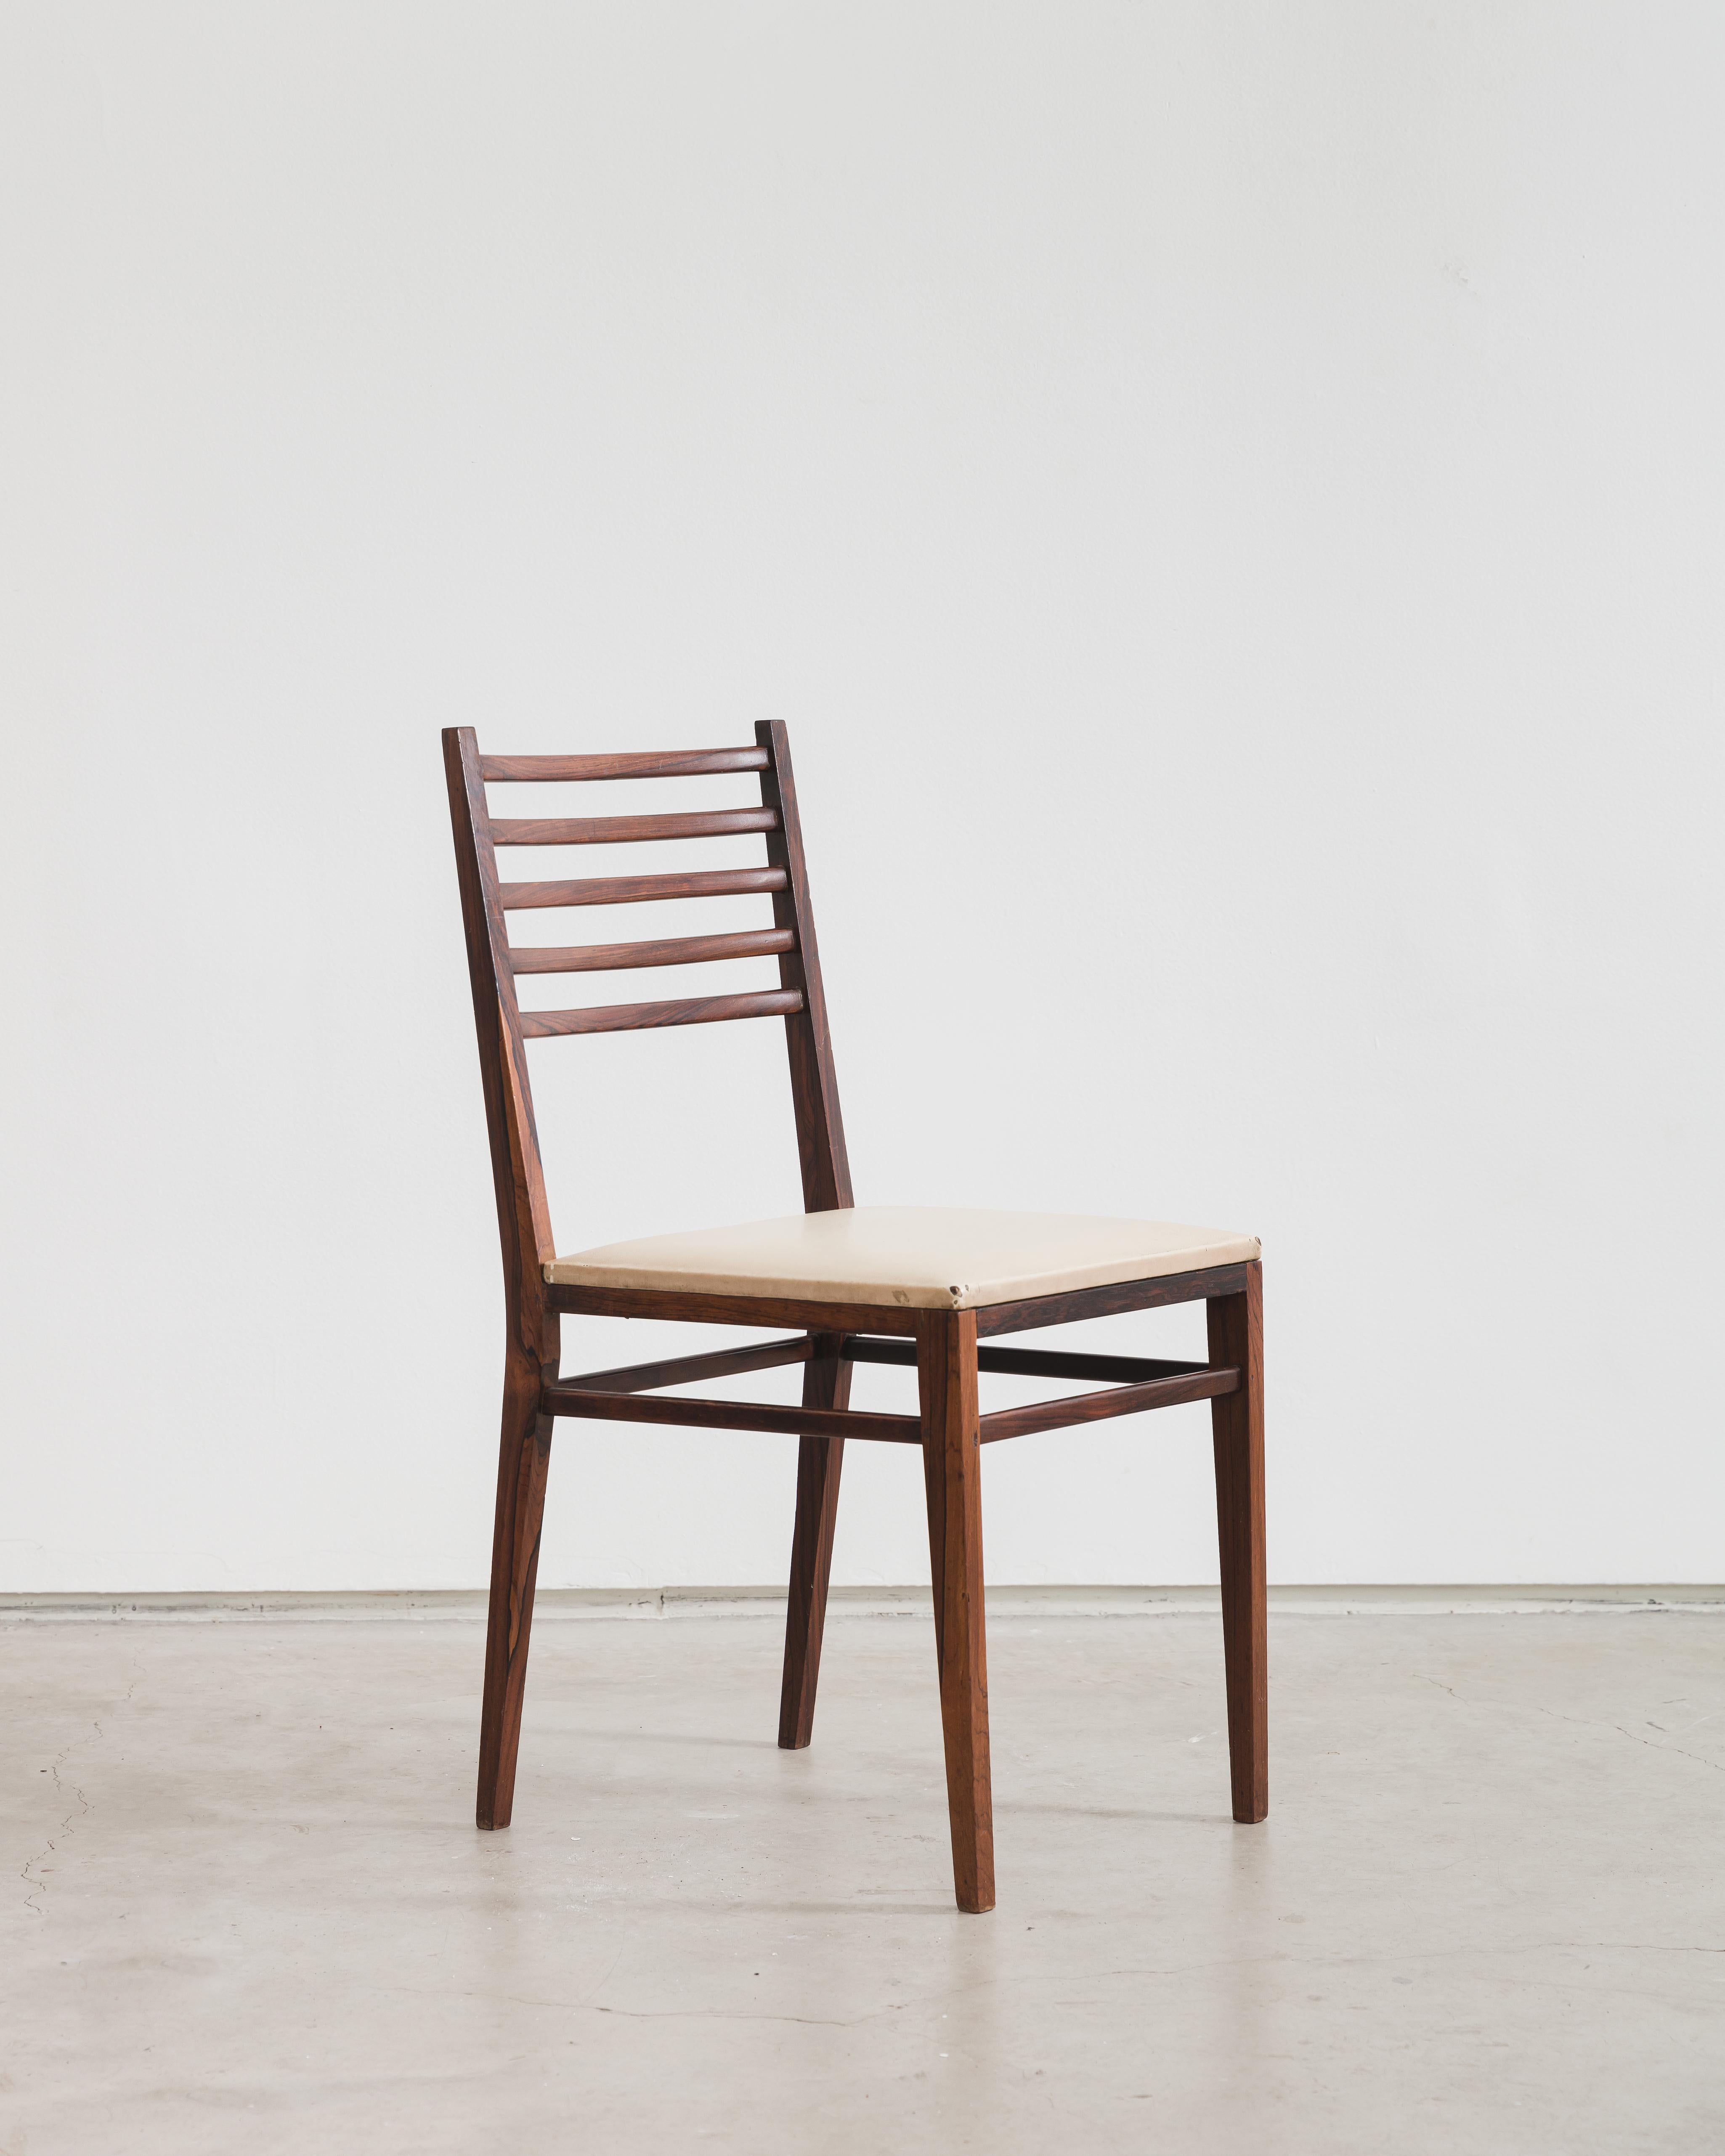 This chair designed by Geraldo de Barros has a light structure in solid rosewood, a characteristic of Unilabor's production, which used fine shapes in its designs for better use of its materials. The backrest is formed by five horizontal rods, with